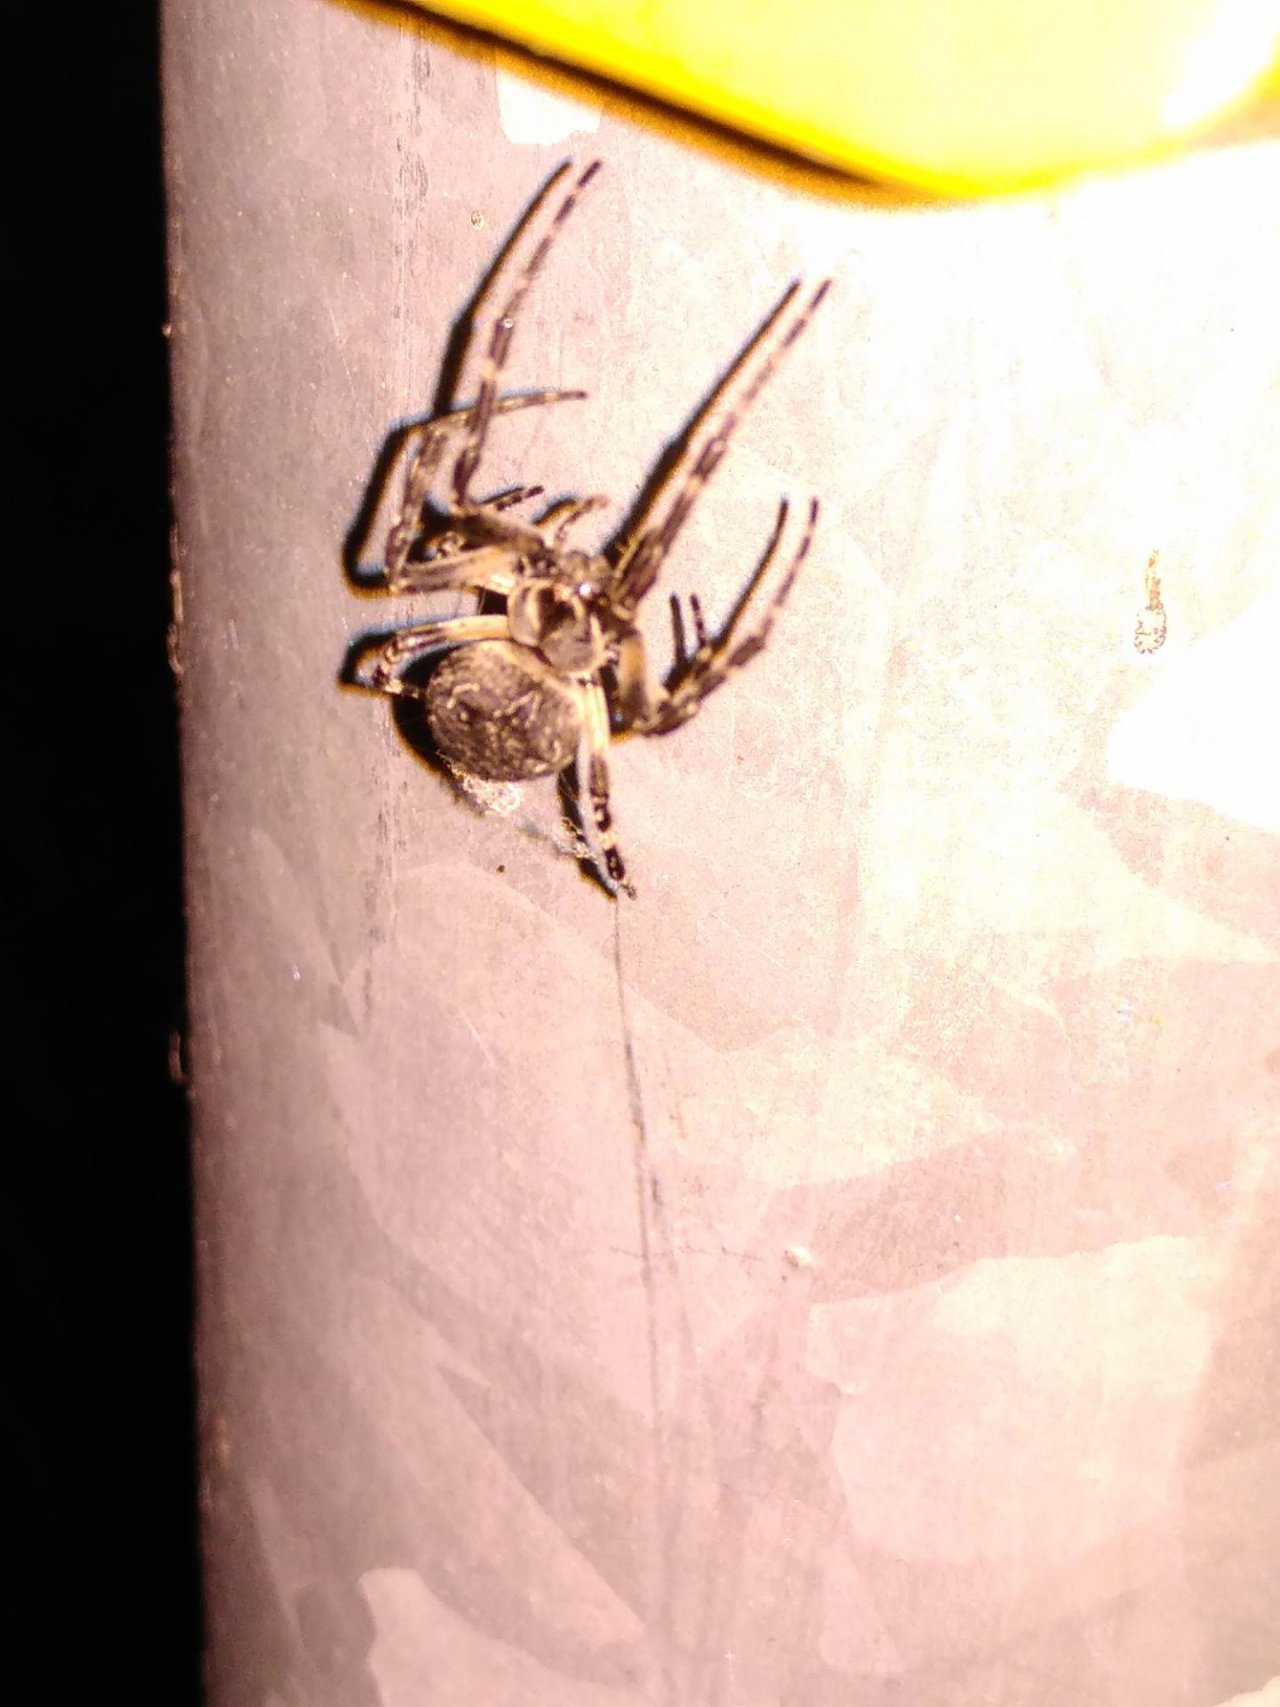 Walnut Orb Weaver in SpiderSpotter App spotted by TheOSWR on 23.12.2020